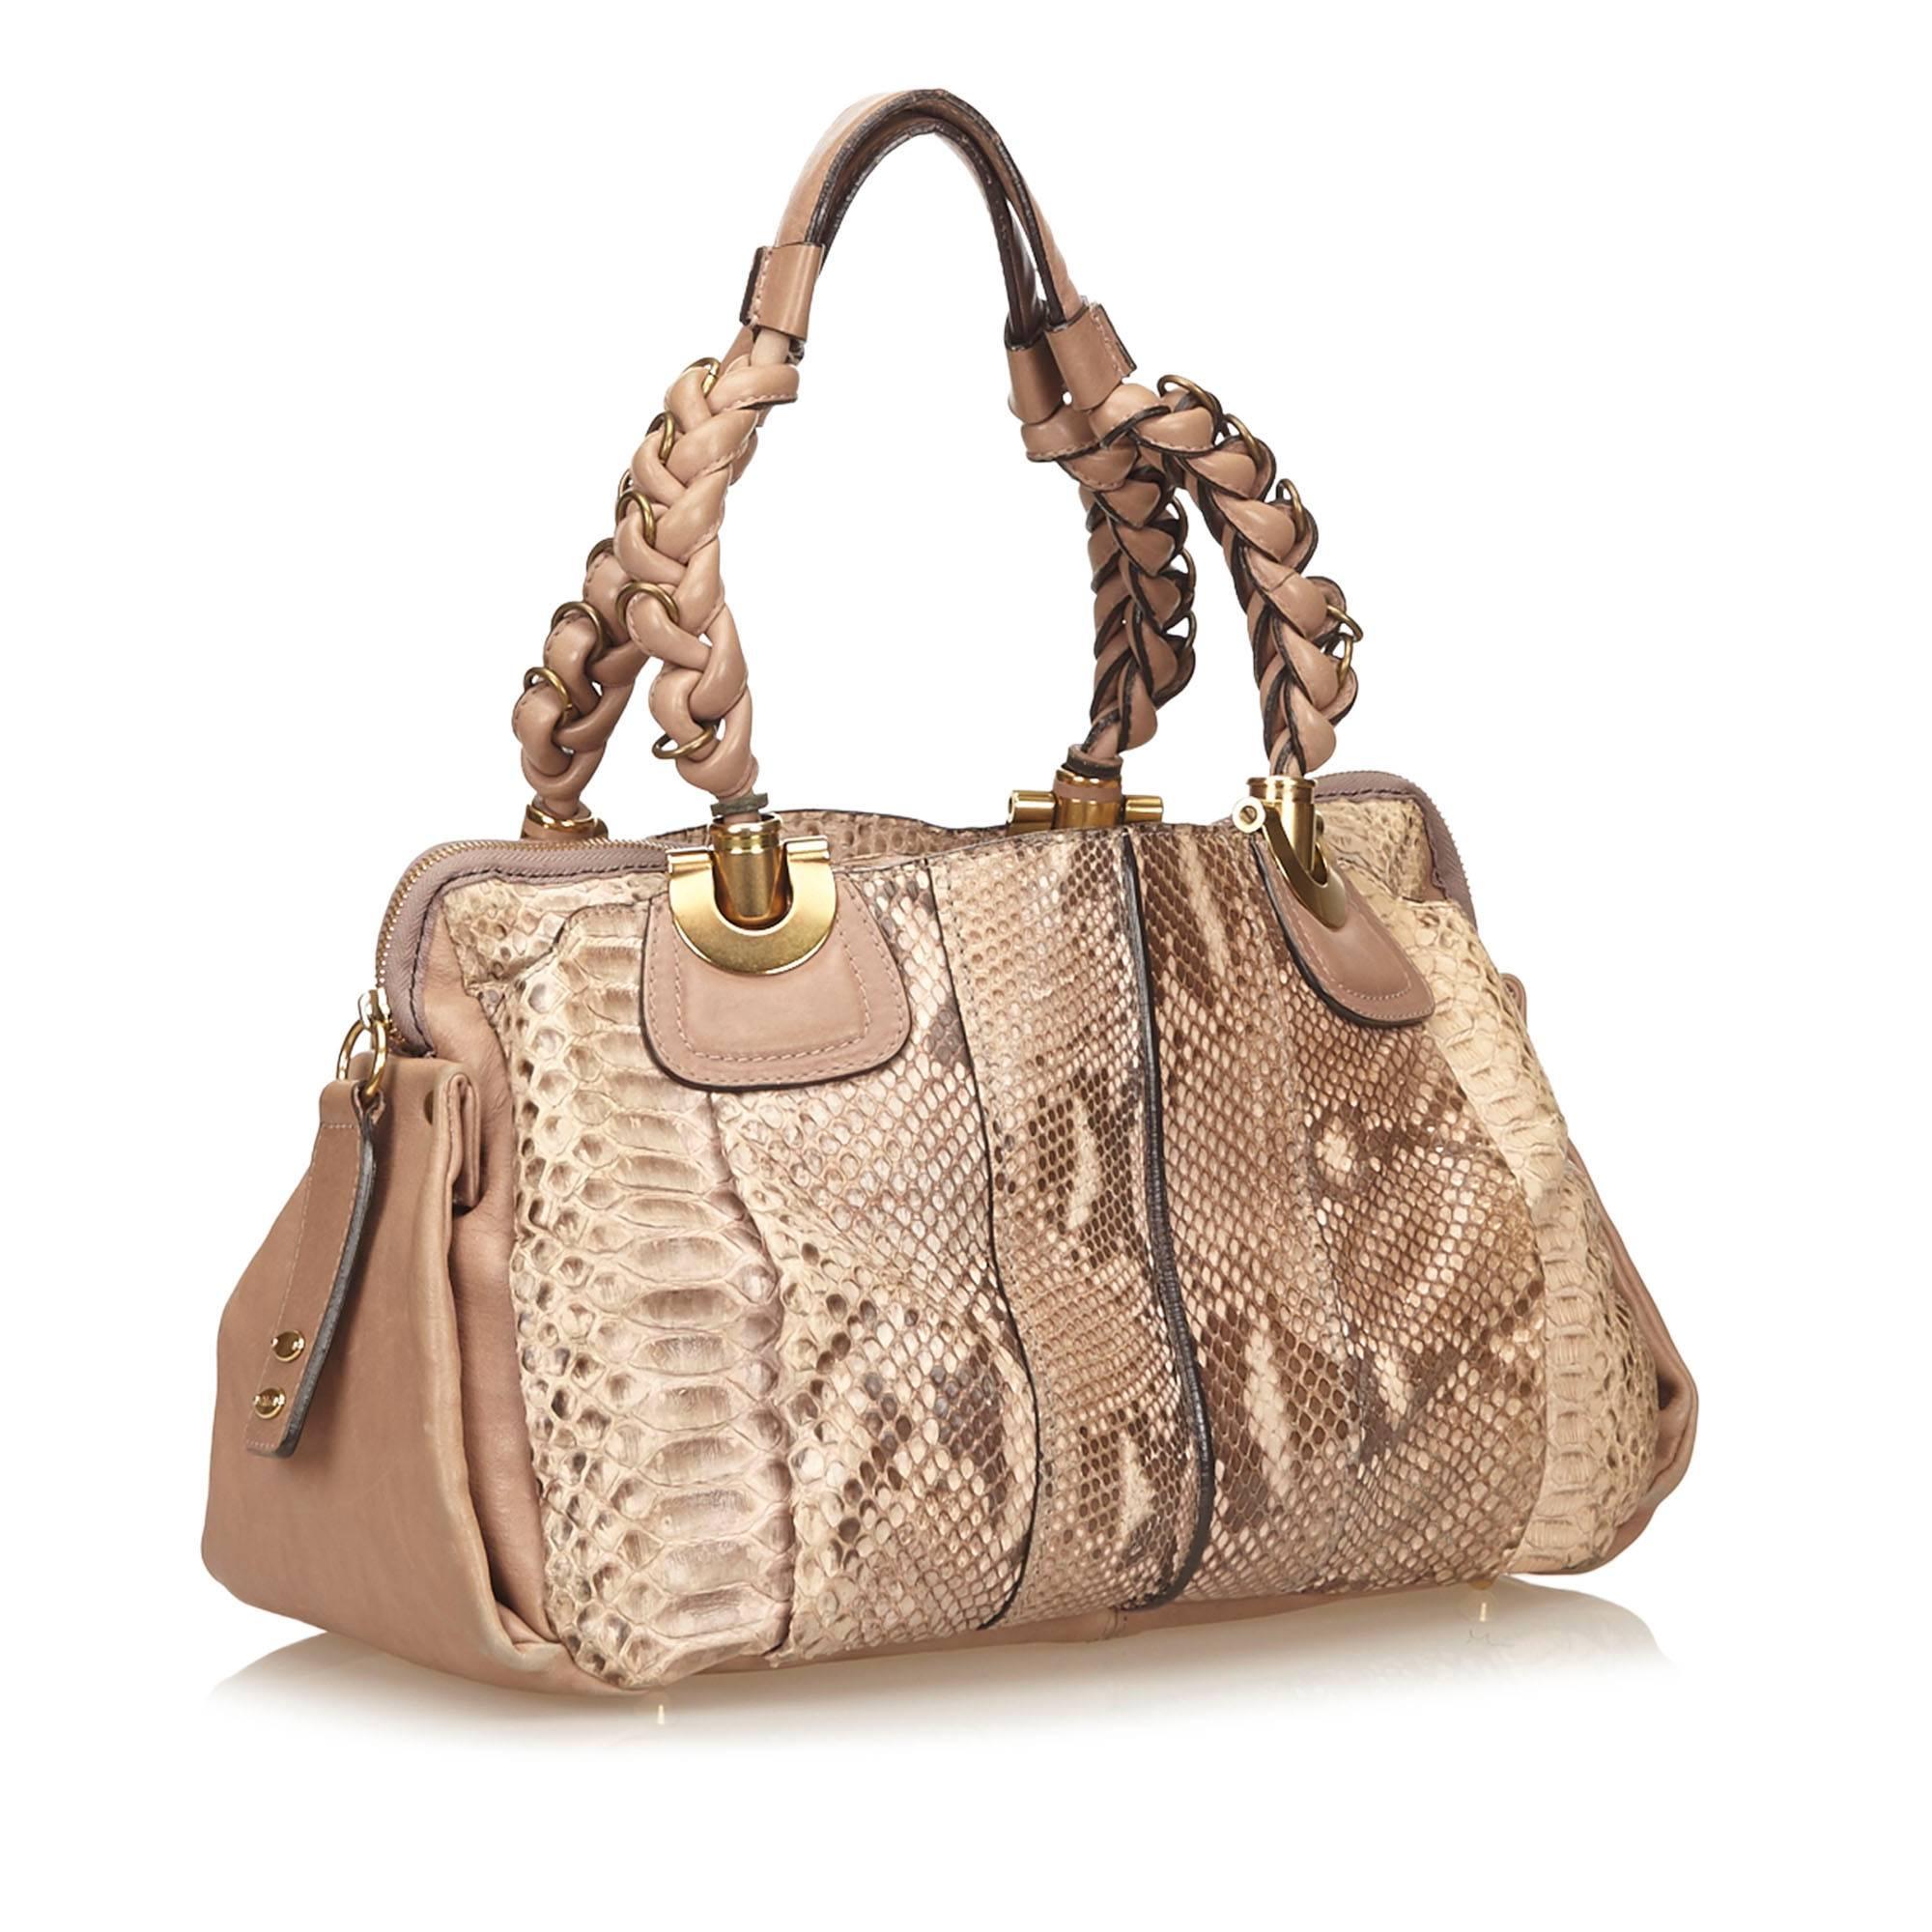 Product details:  Brown python Heloise shoulder bag by Chloé.  Trimmed with leather.  Dual braided shoulder straps.  Top zip closure.  Lined interior with inner zip and slide pockets.  Protective metal feet.  Goldtone hardware.  15